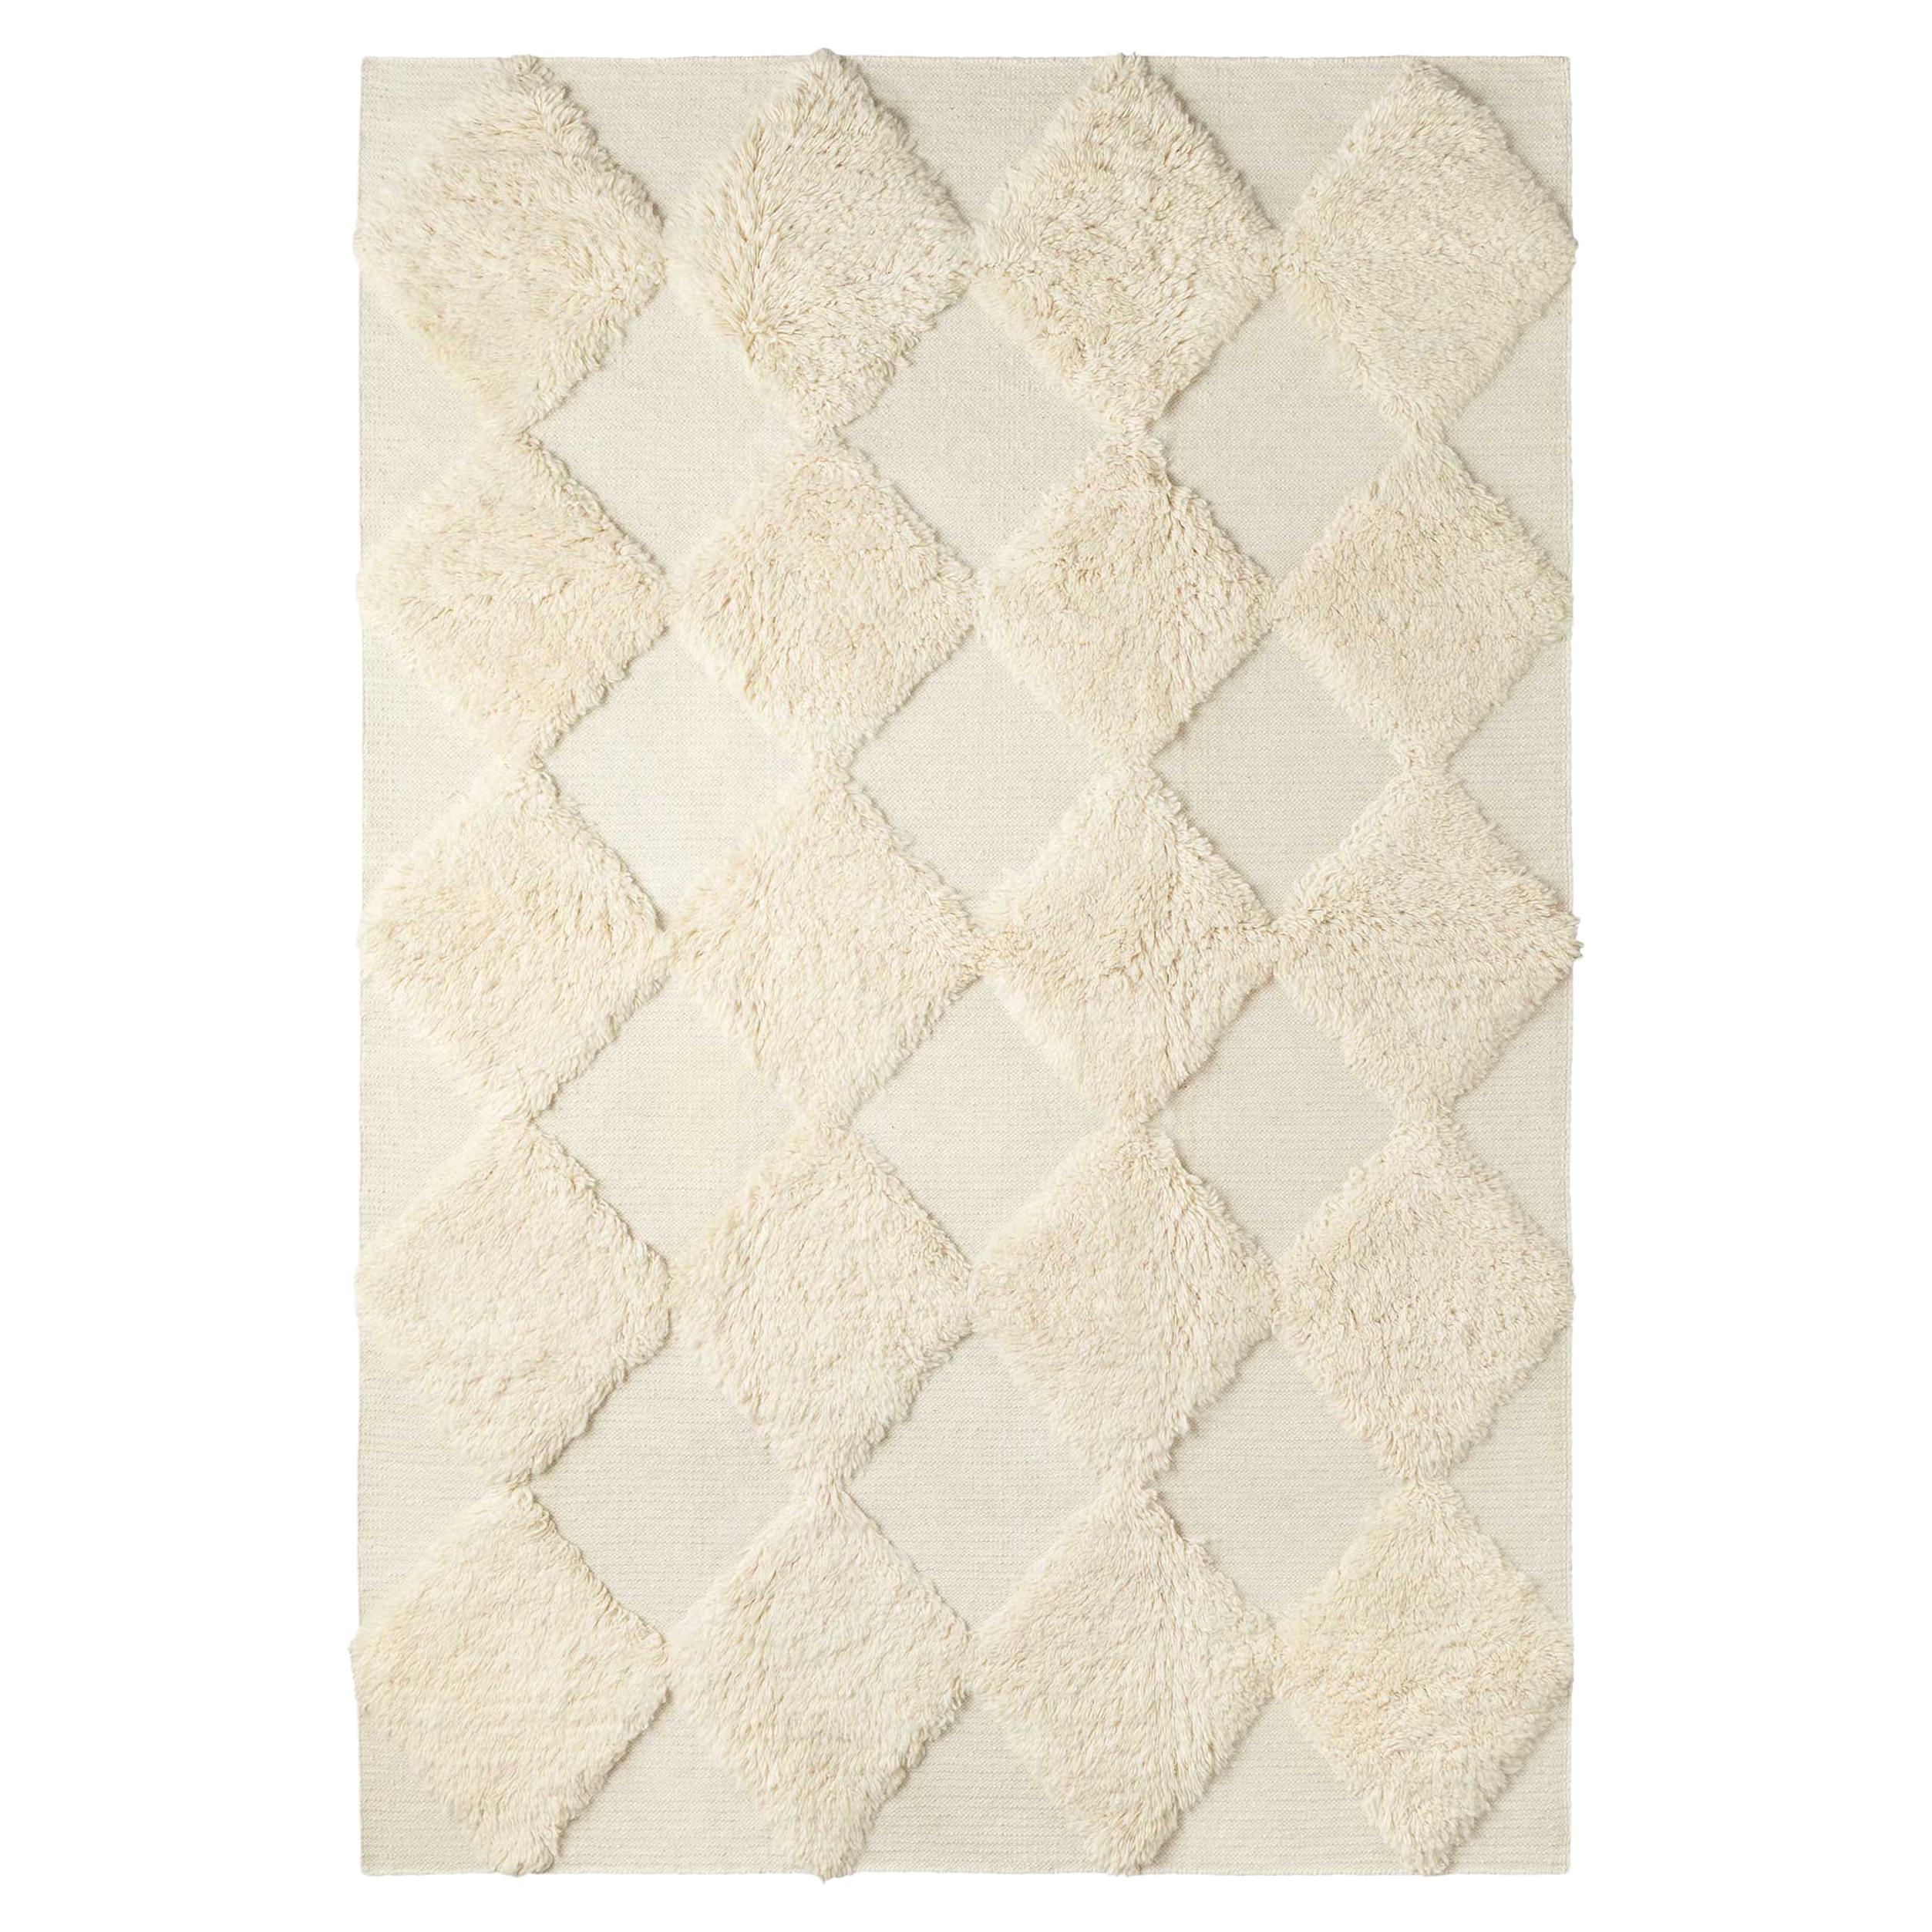 Handwoven Shaggy Chess Wool Rug White Large For Sale